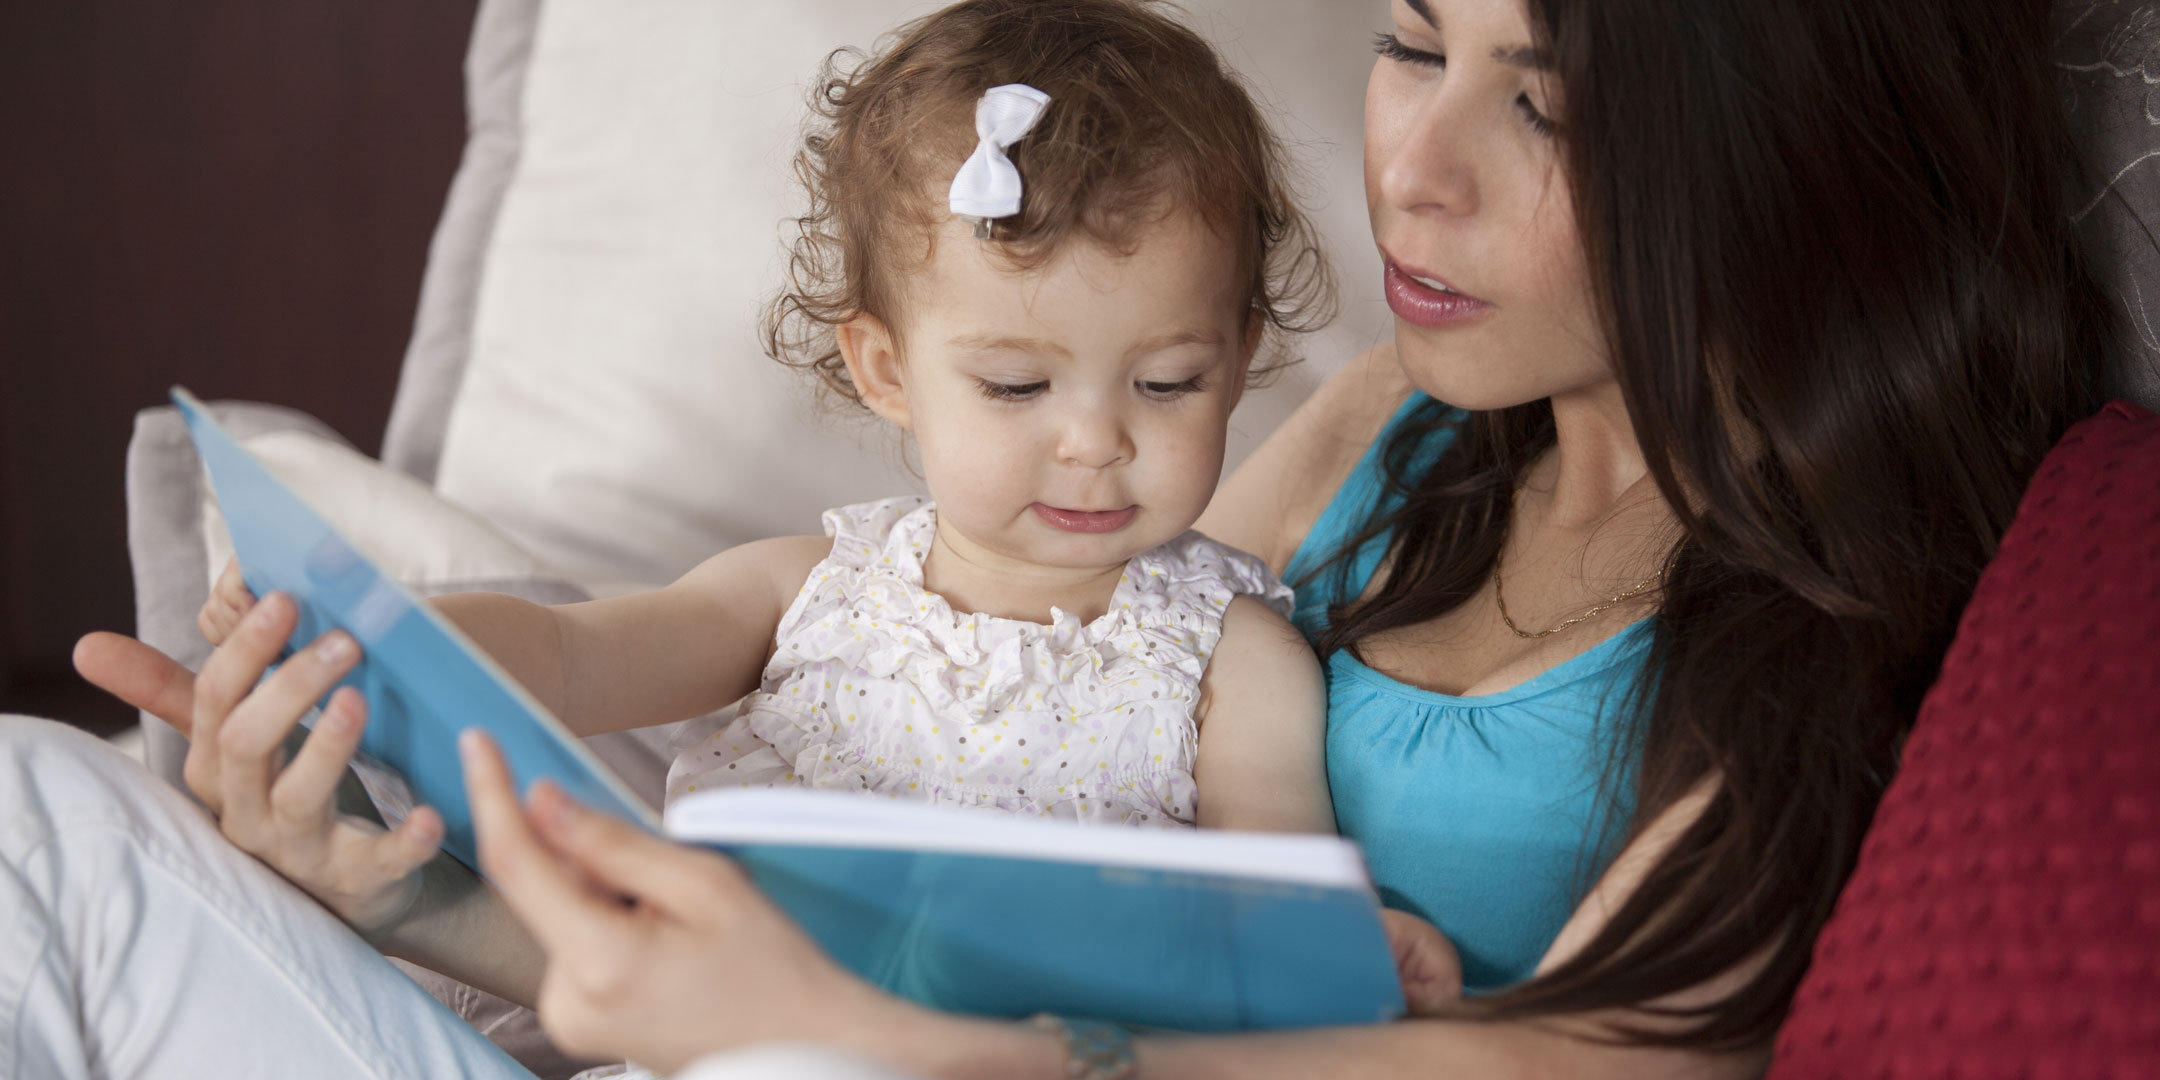 Tween girl reading to an infant girl that she is babysitting